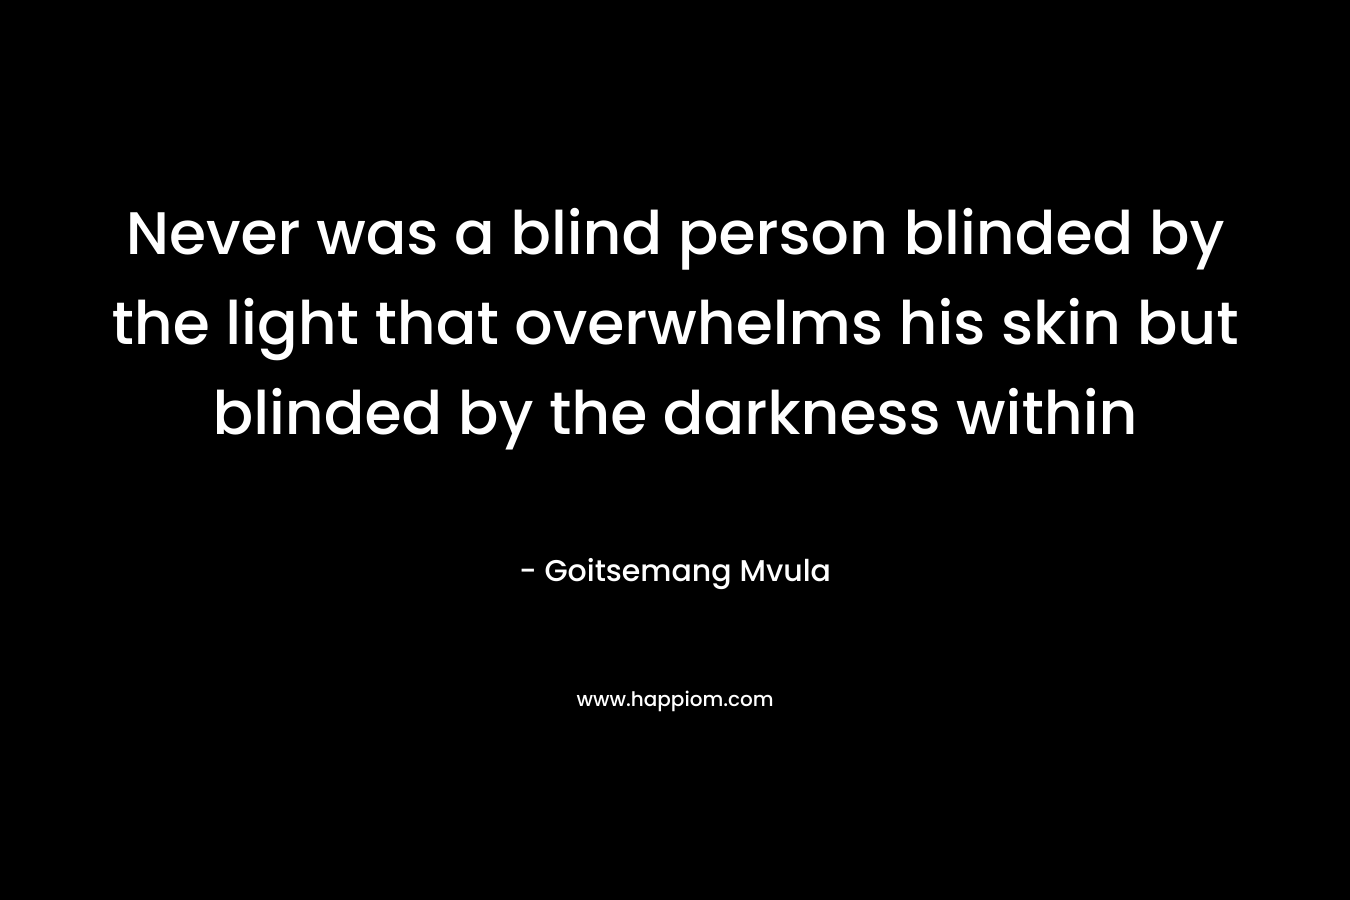 Never was a blind person blinded by the light that overwhelms his skin but blinded by the darkness within